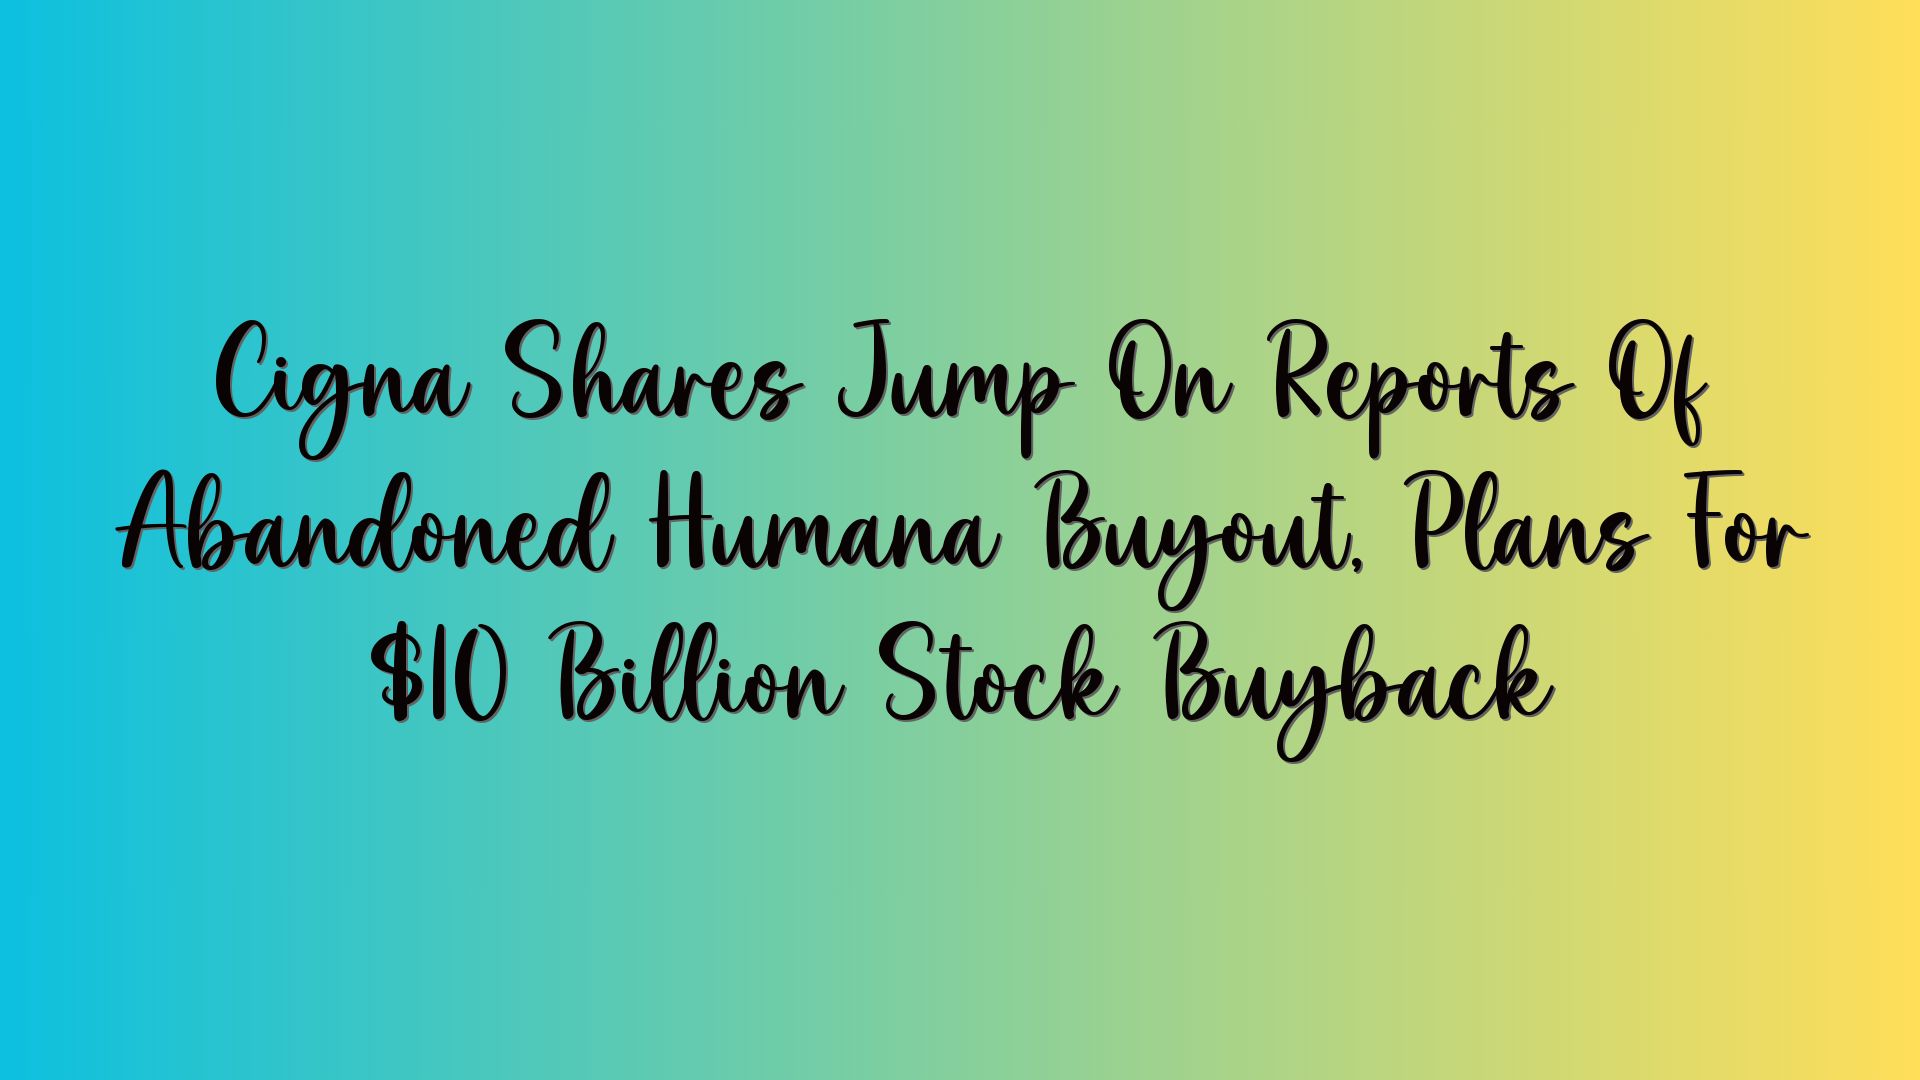 Cigna Shares Jump On Reports Of Abandoned Humana Buyout, Plans For $10 Billion Stock Buyback